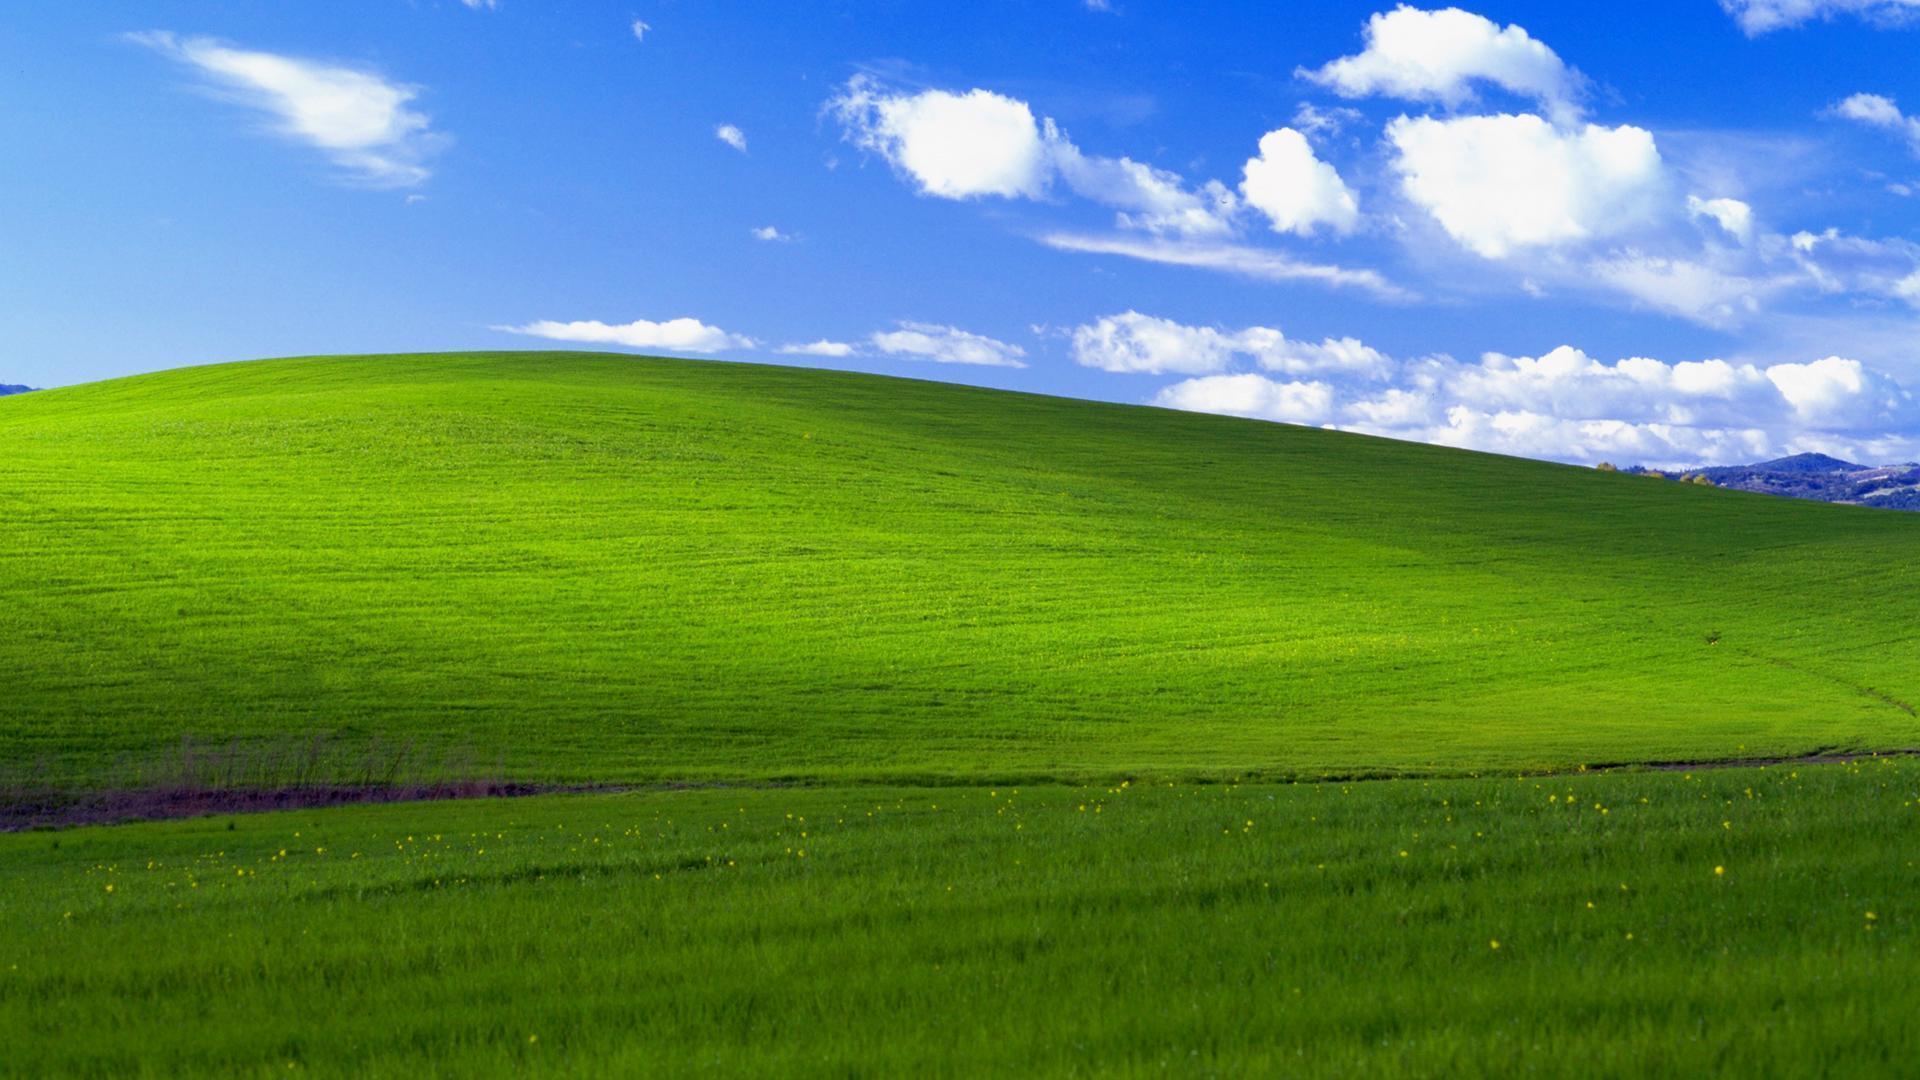 Windows XP "Bliss" Background recreated in Minecraft xpost